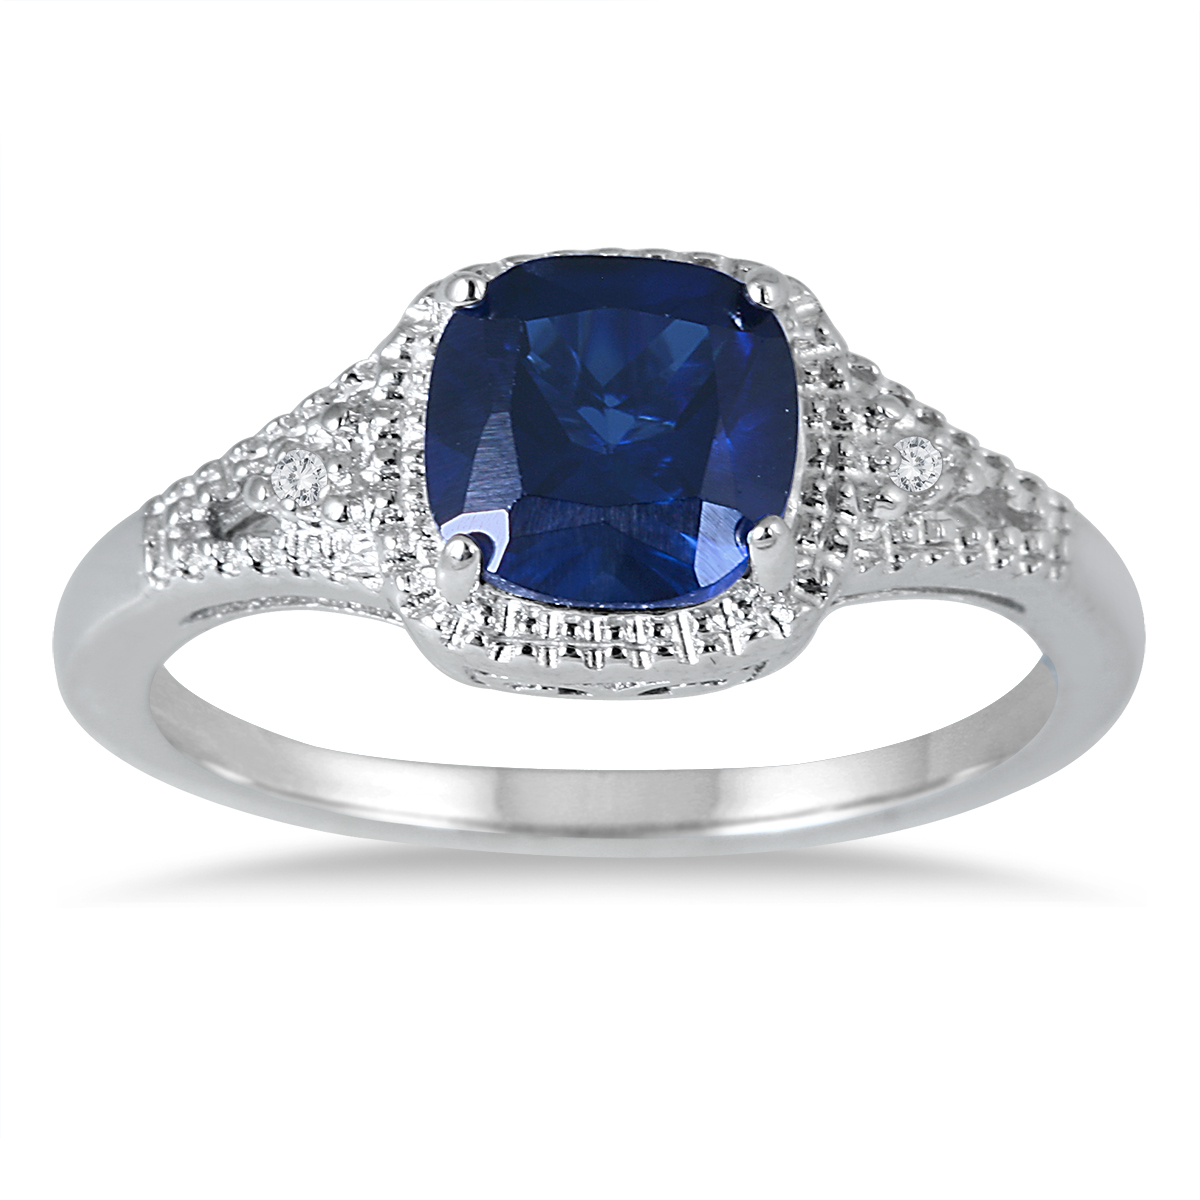 7MM Created Sapphire and Diamond Ring in .925 Sterling Silver